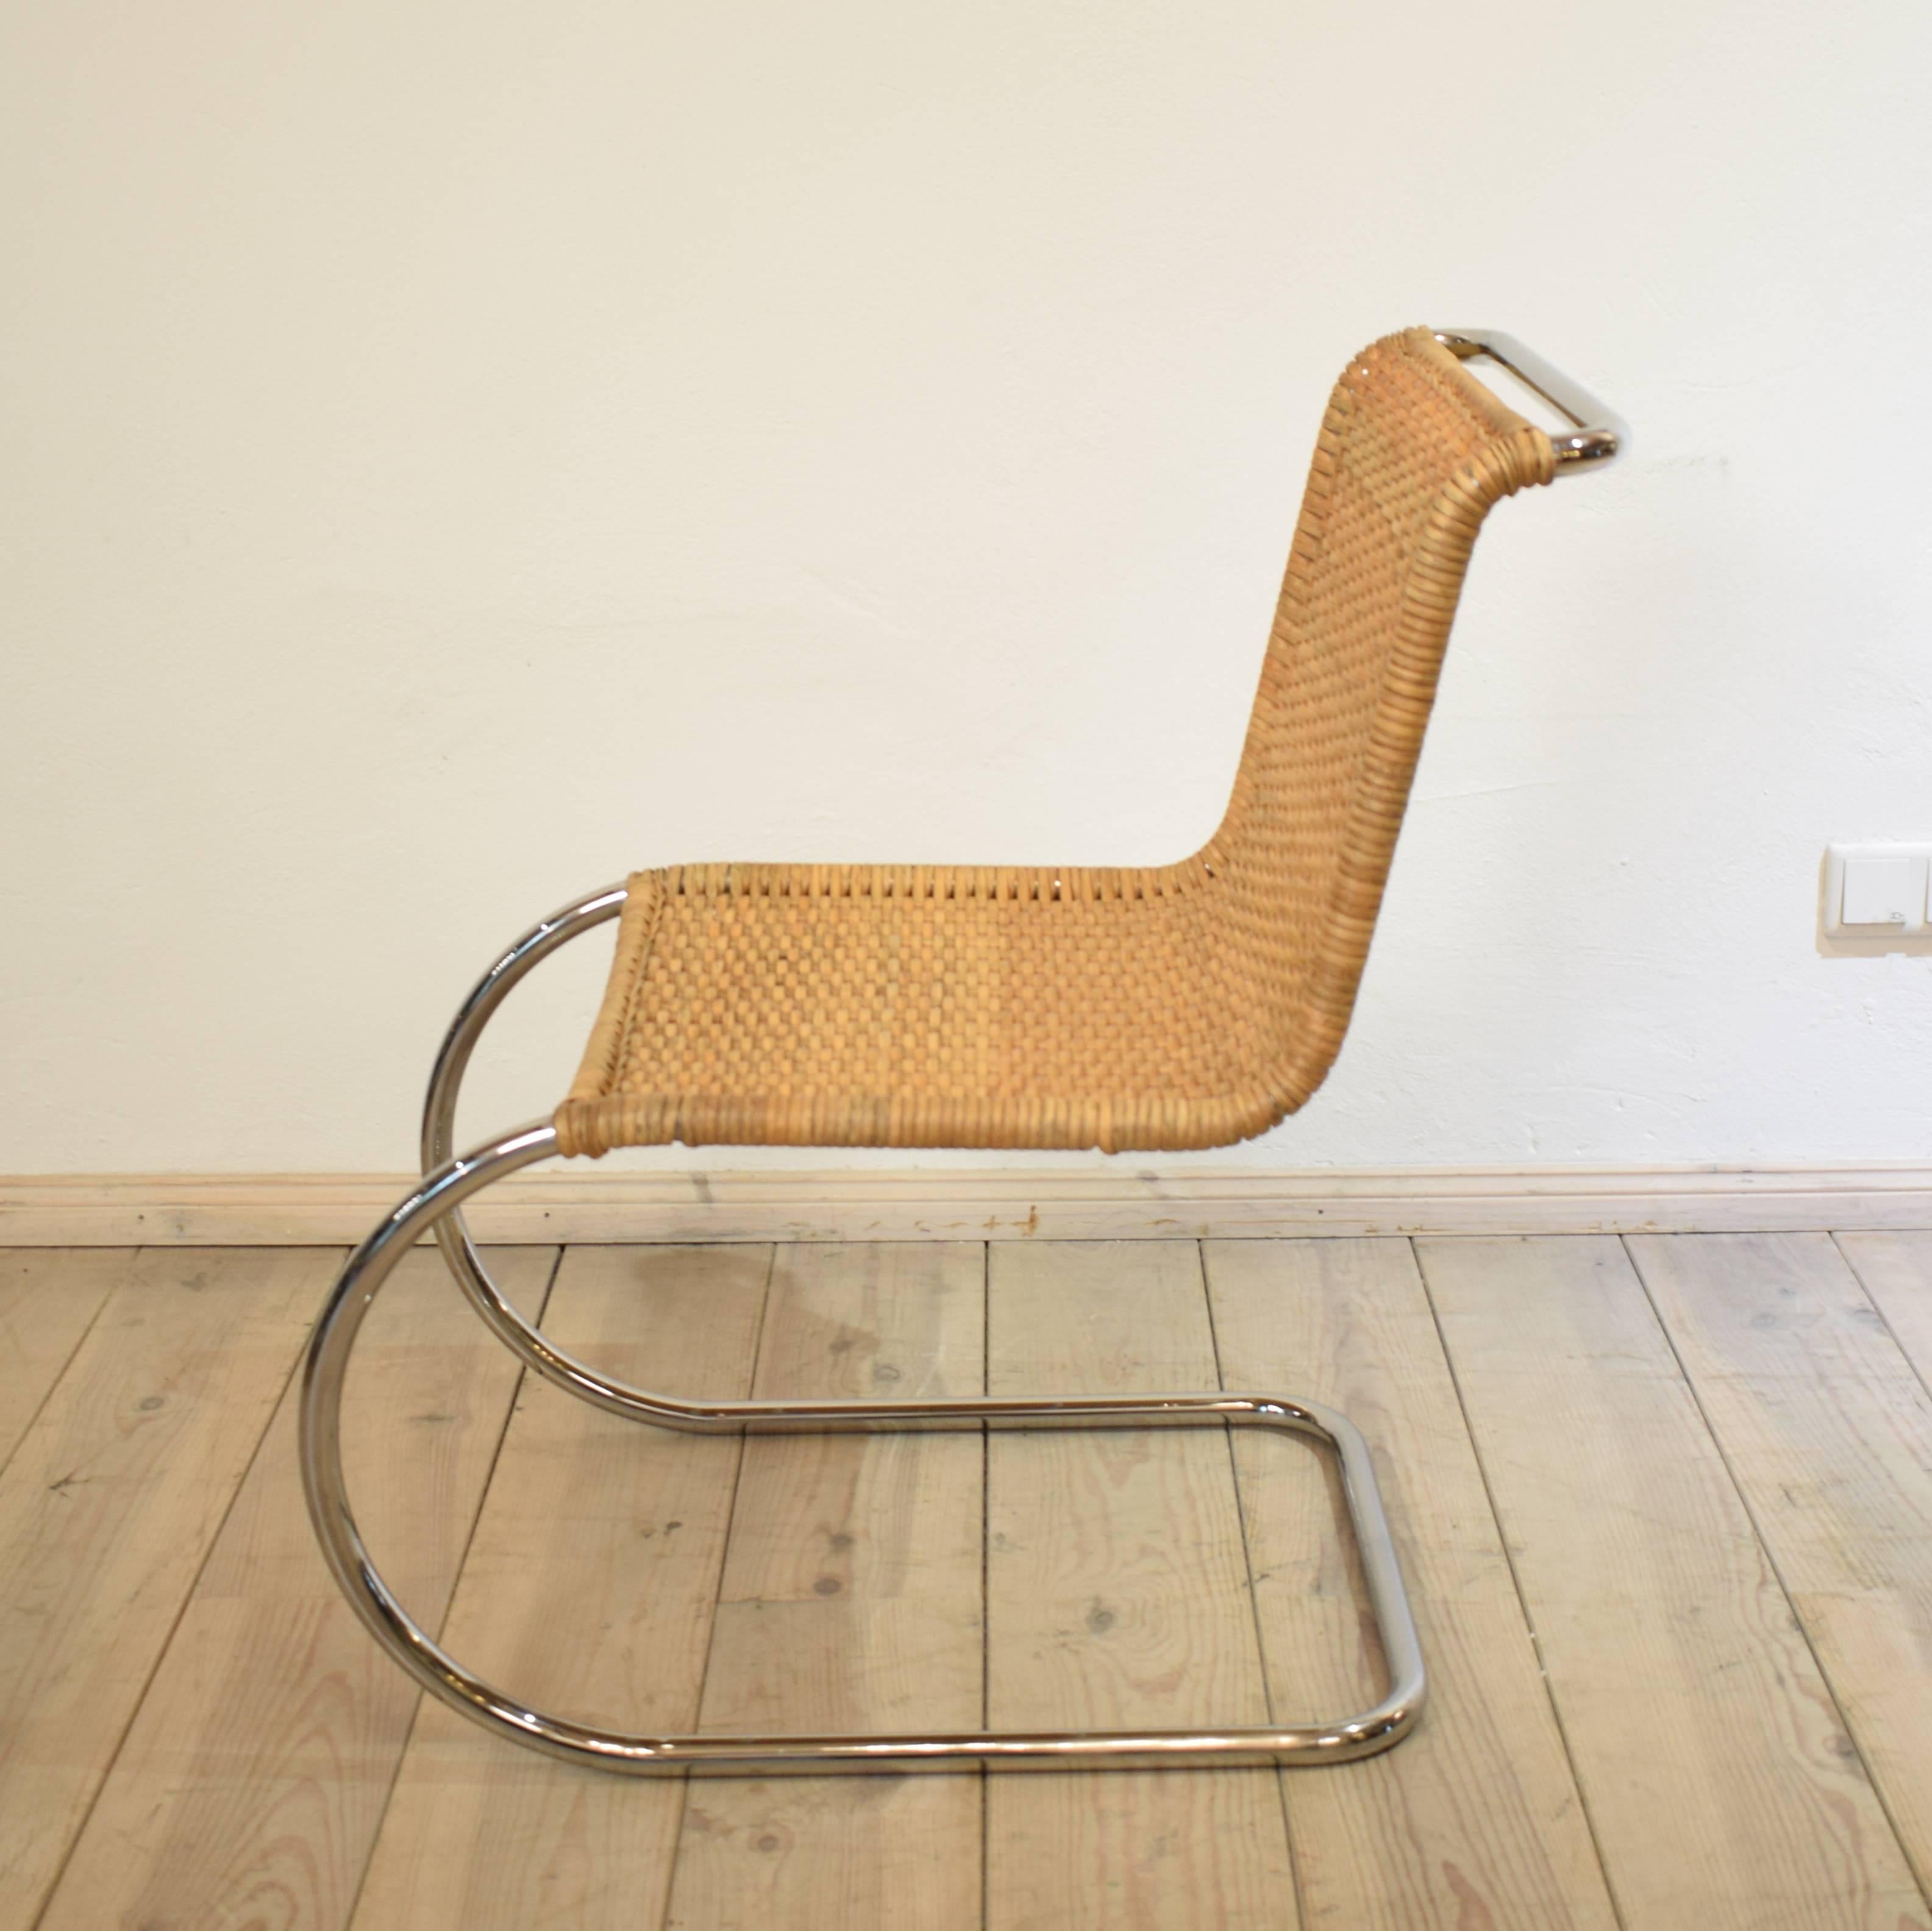 This Thonet MR chair/S533 cantilever chair by Ludwig Mies van der Rohe was made in the 1930s. It is in a very good condition and has a patina.